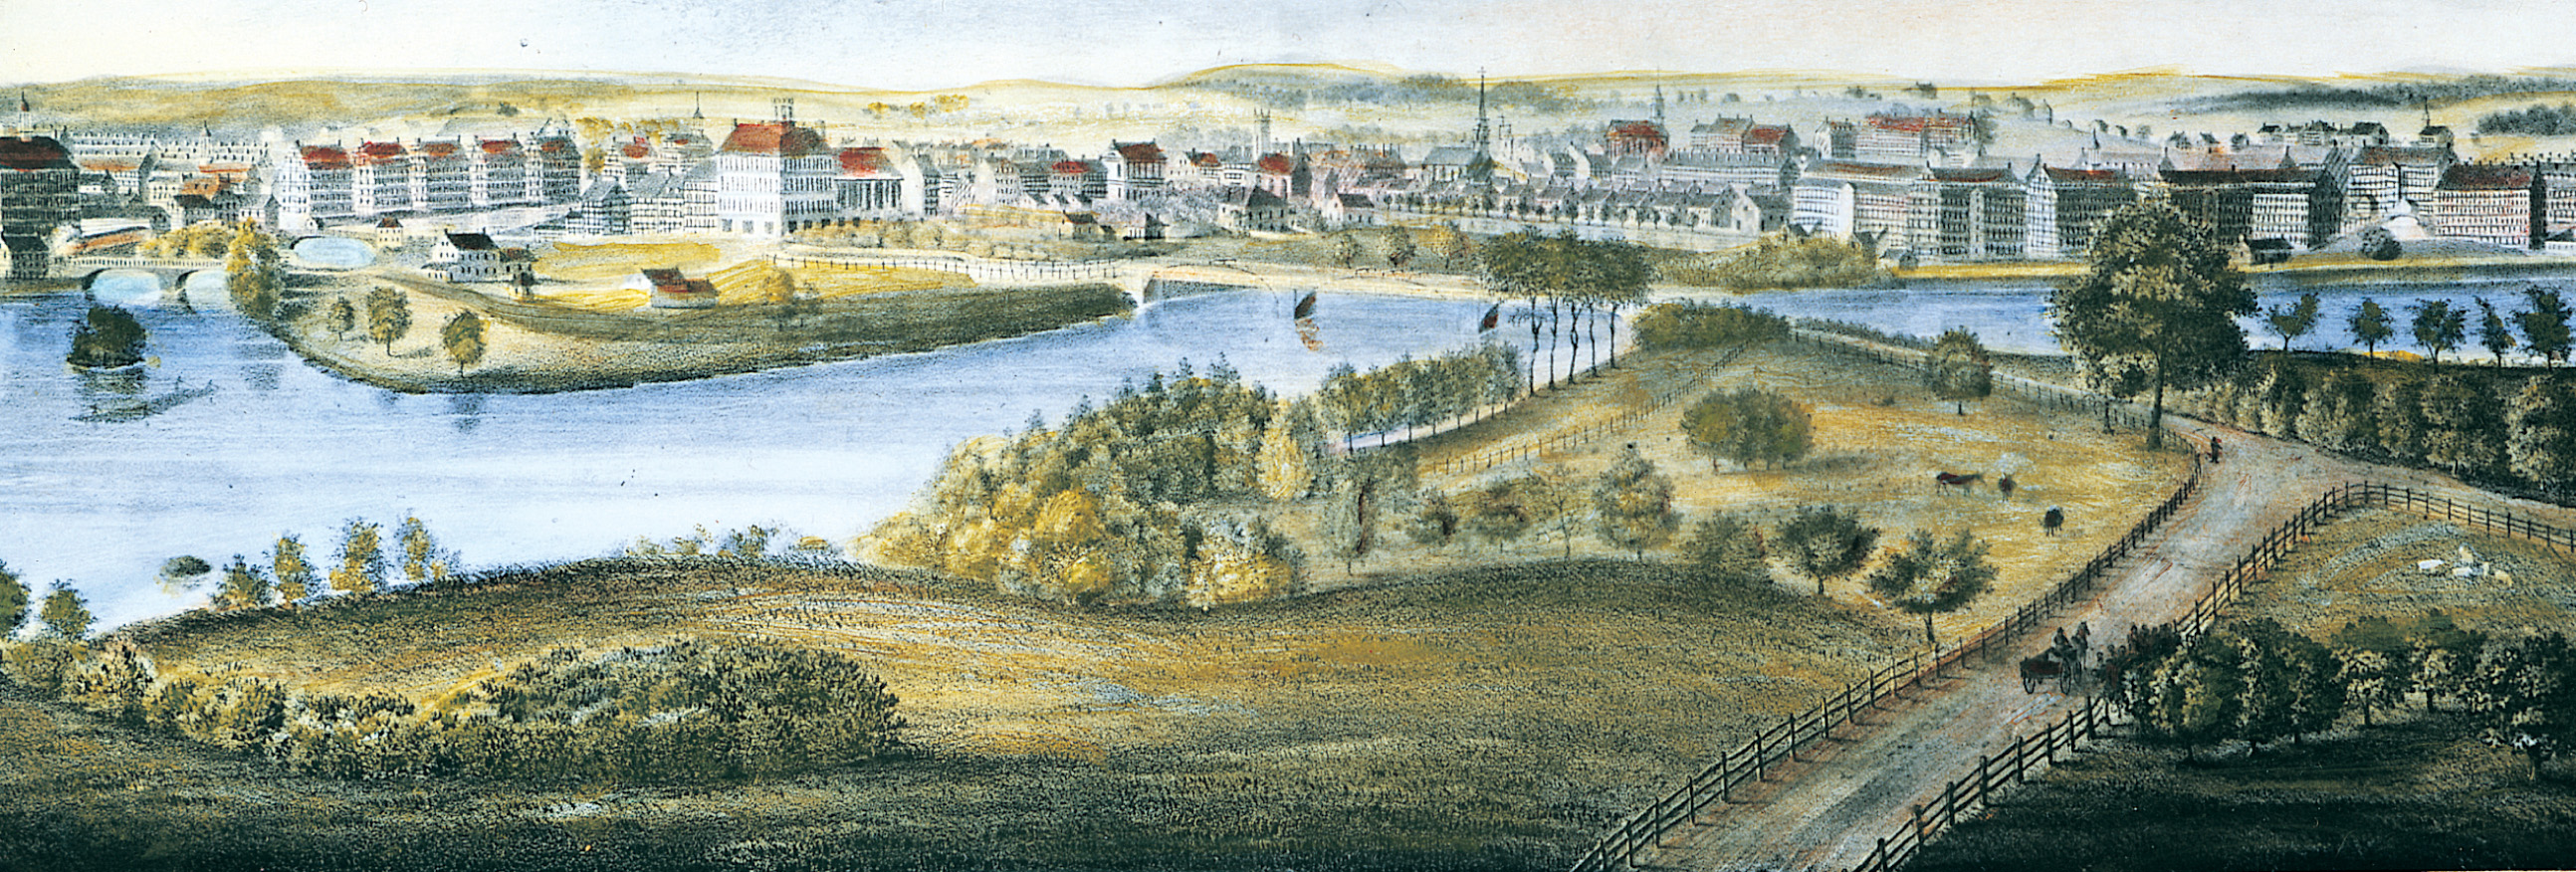 A painting shows dozens of factory buildings lining a wide
river.